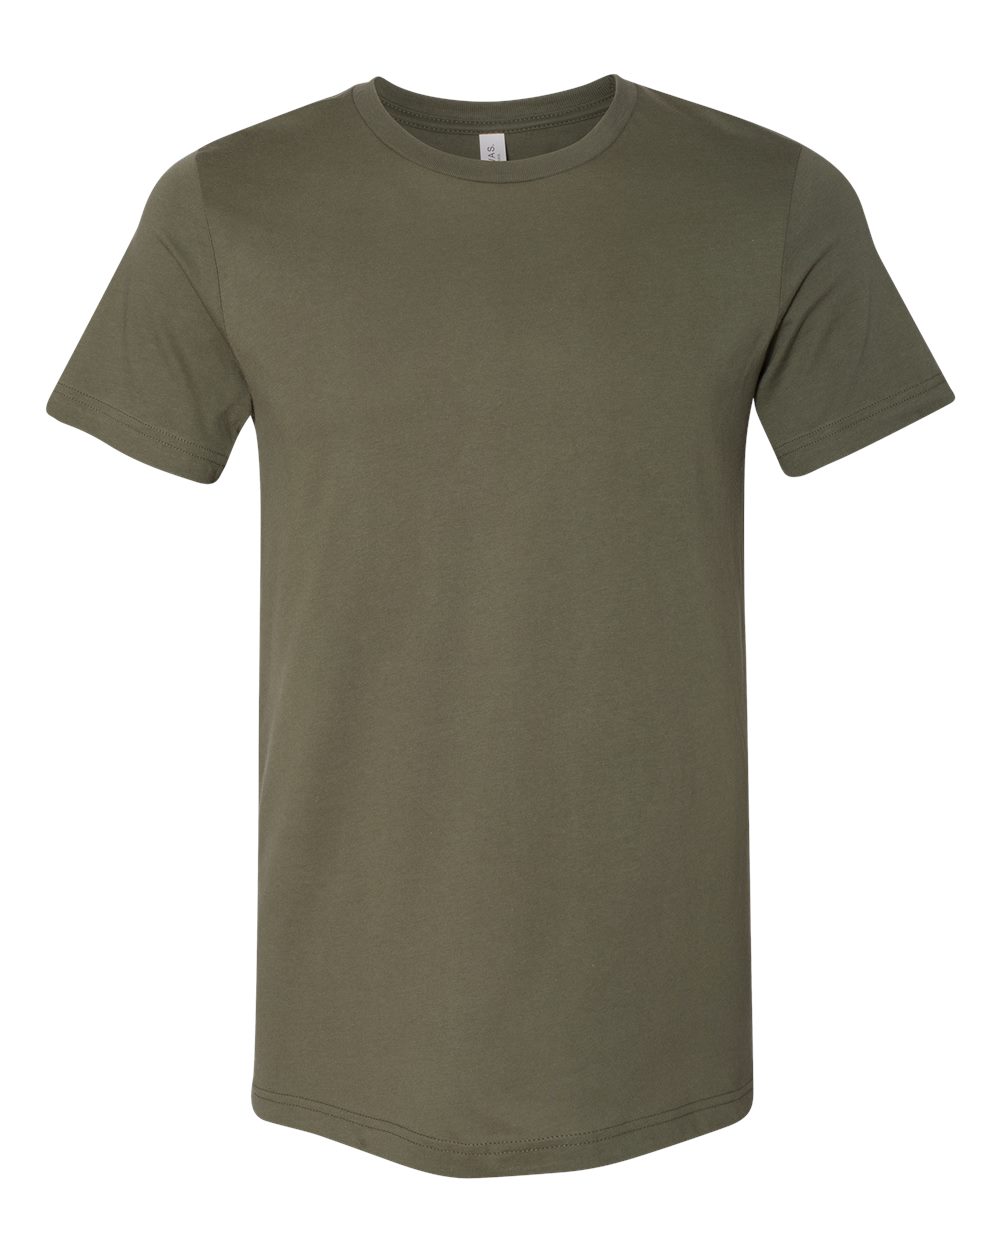 Selected Color is Military Green